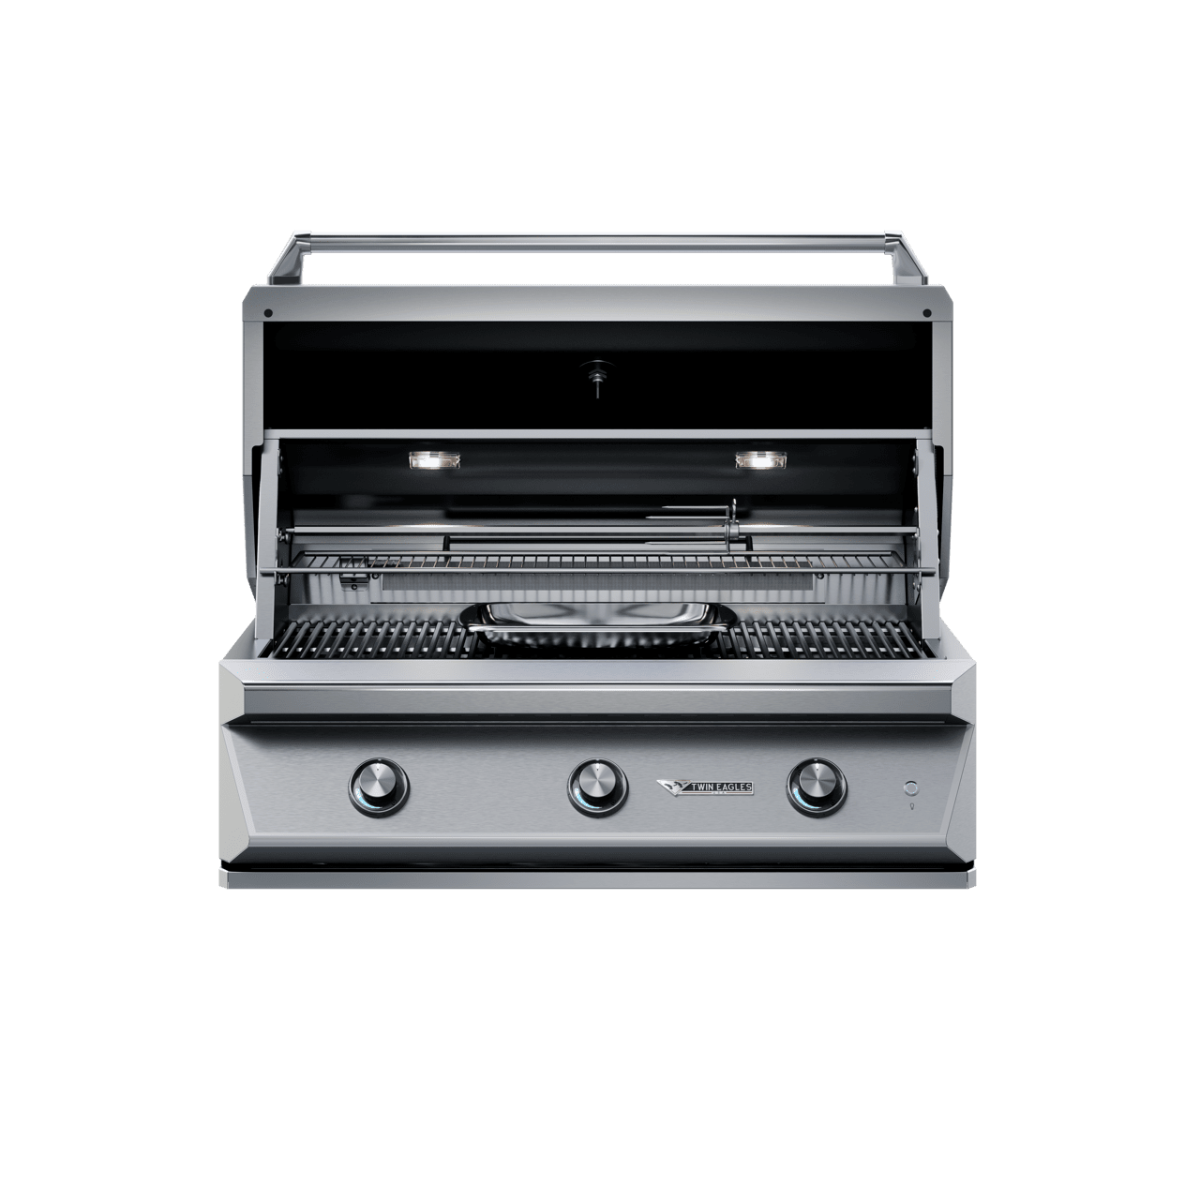 Front view of a 42-inch Twin Eagles gas grill with the lid open, revealing the grilling area and internal lights. The stainless steel grill includes three control knobs at the front.